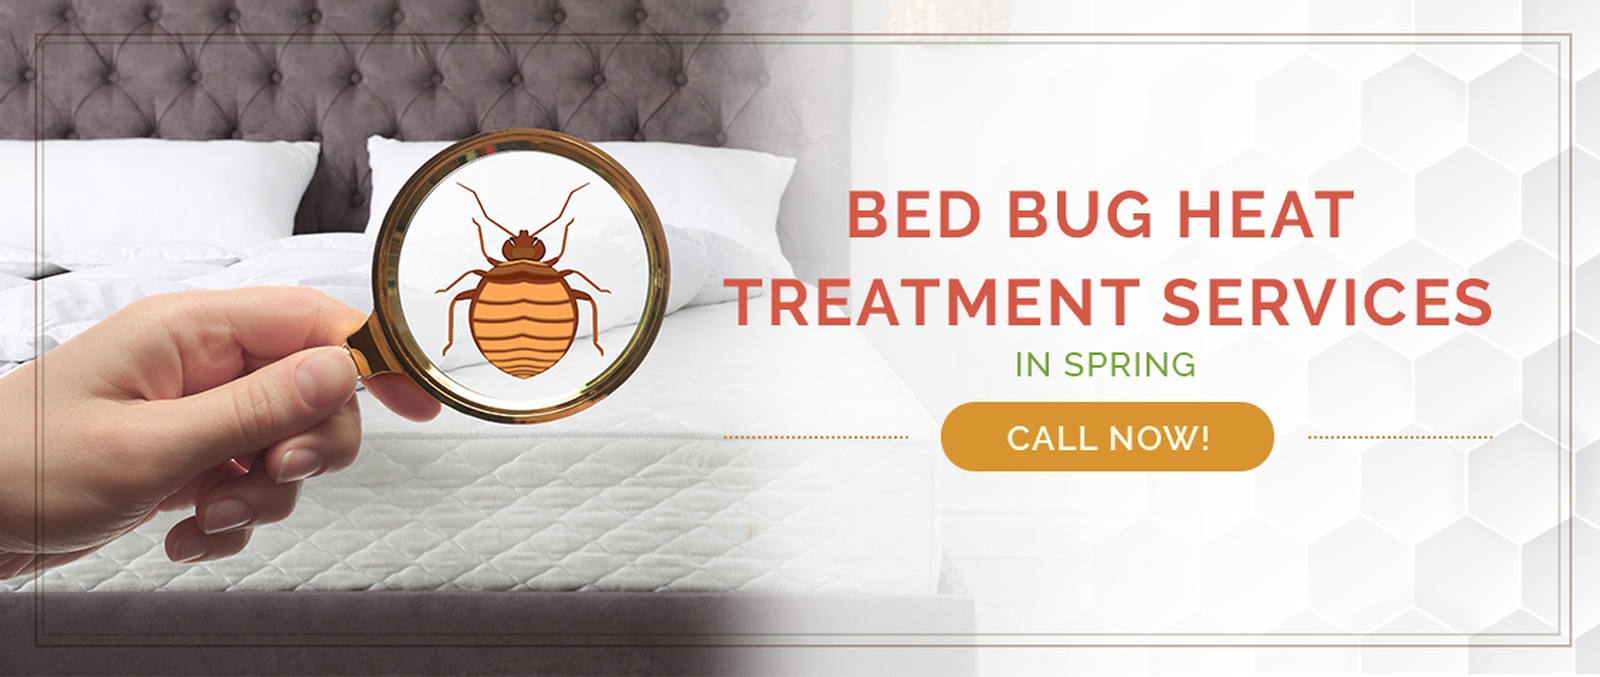 Spring Bed Bug Treatment / Heater Rental Services by Houston Bed Bug Heaters